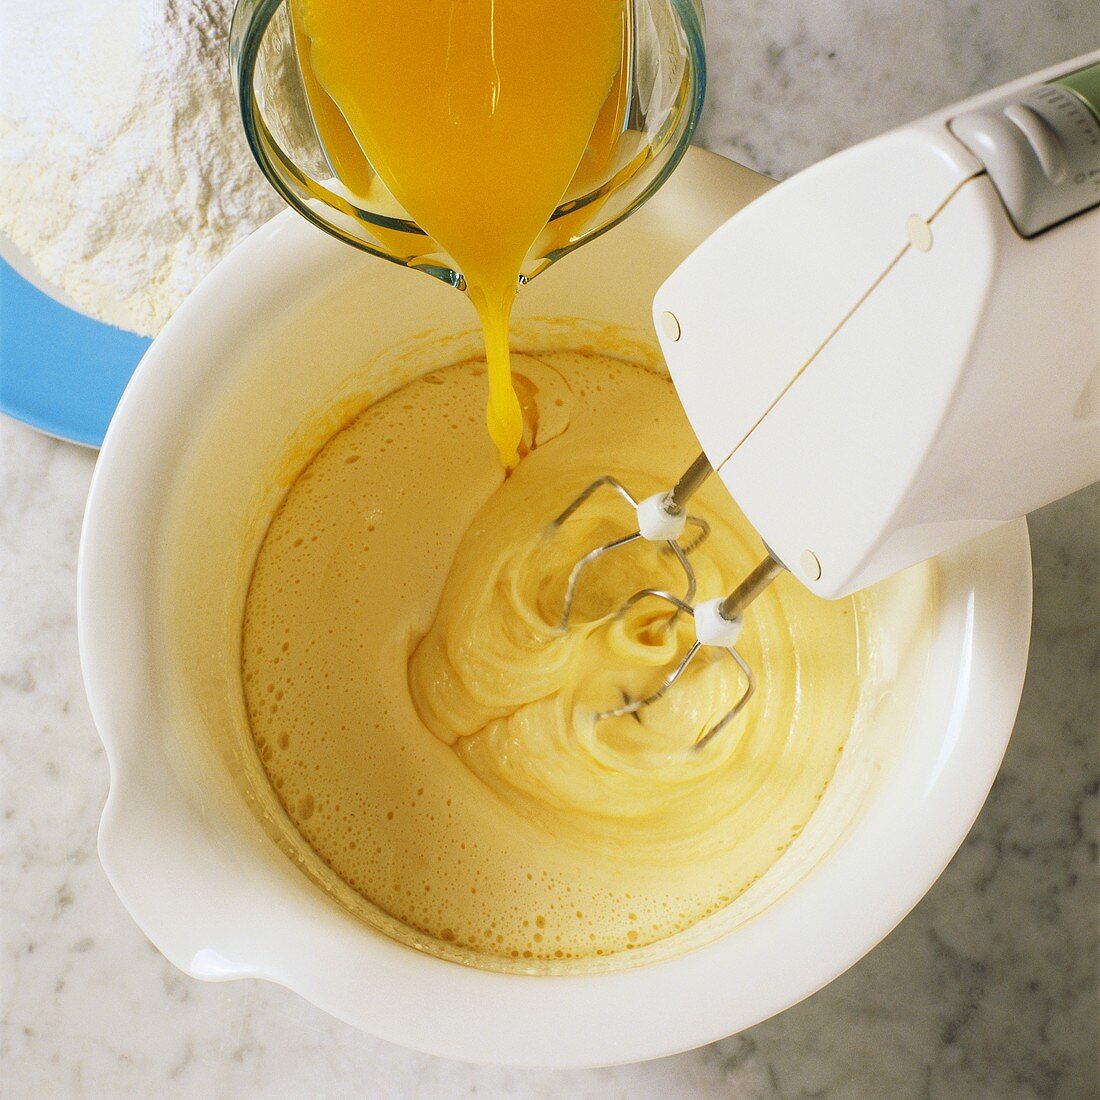 Making cake mixture: mixing oil with juice